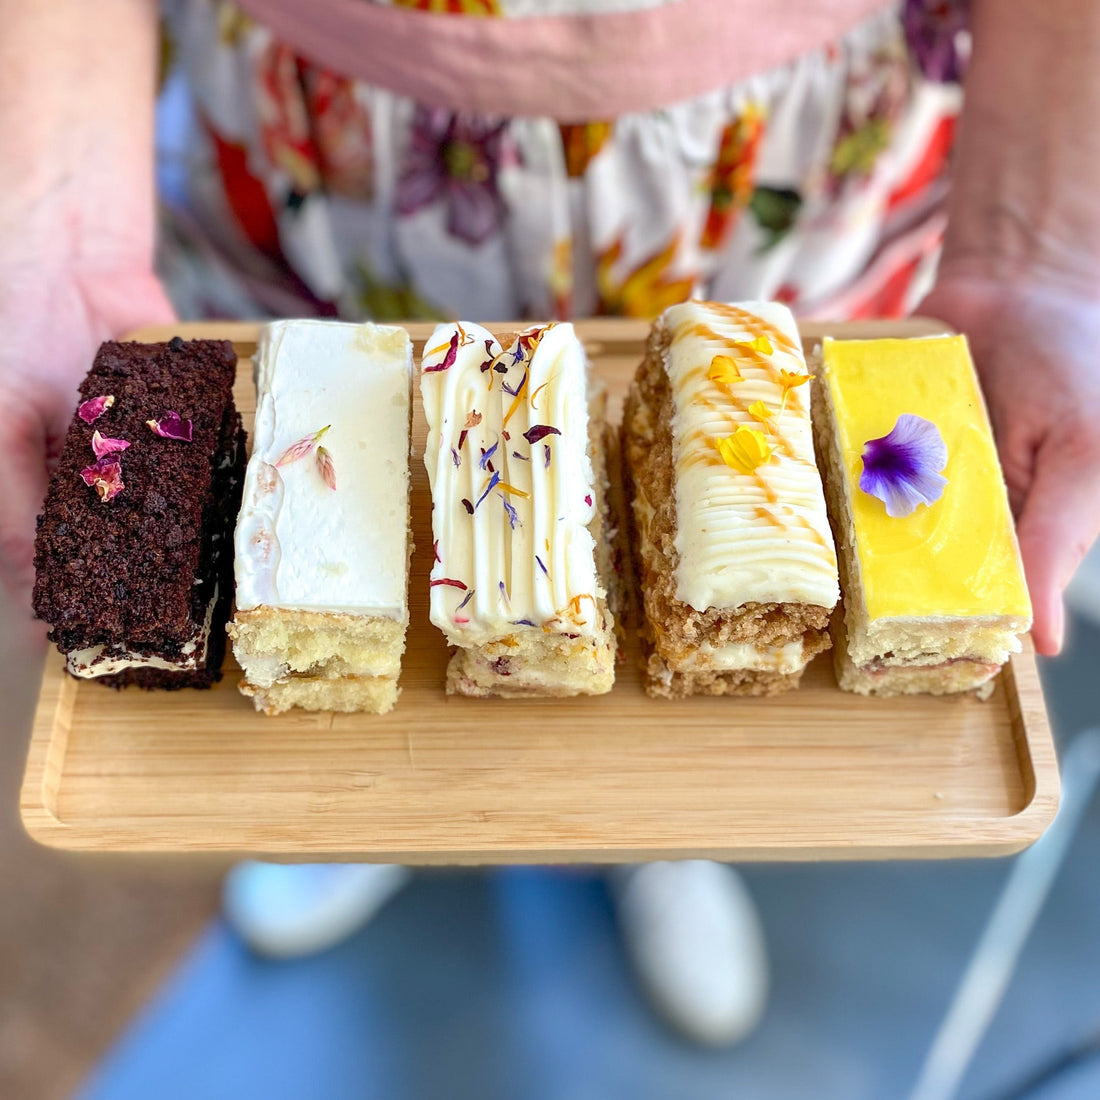 A person holding a wooden platter with five rectangular slices of cake, each a different flavor.